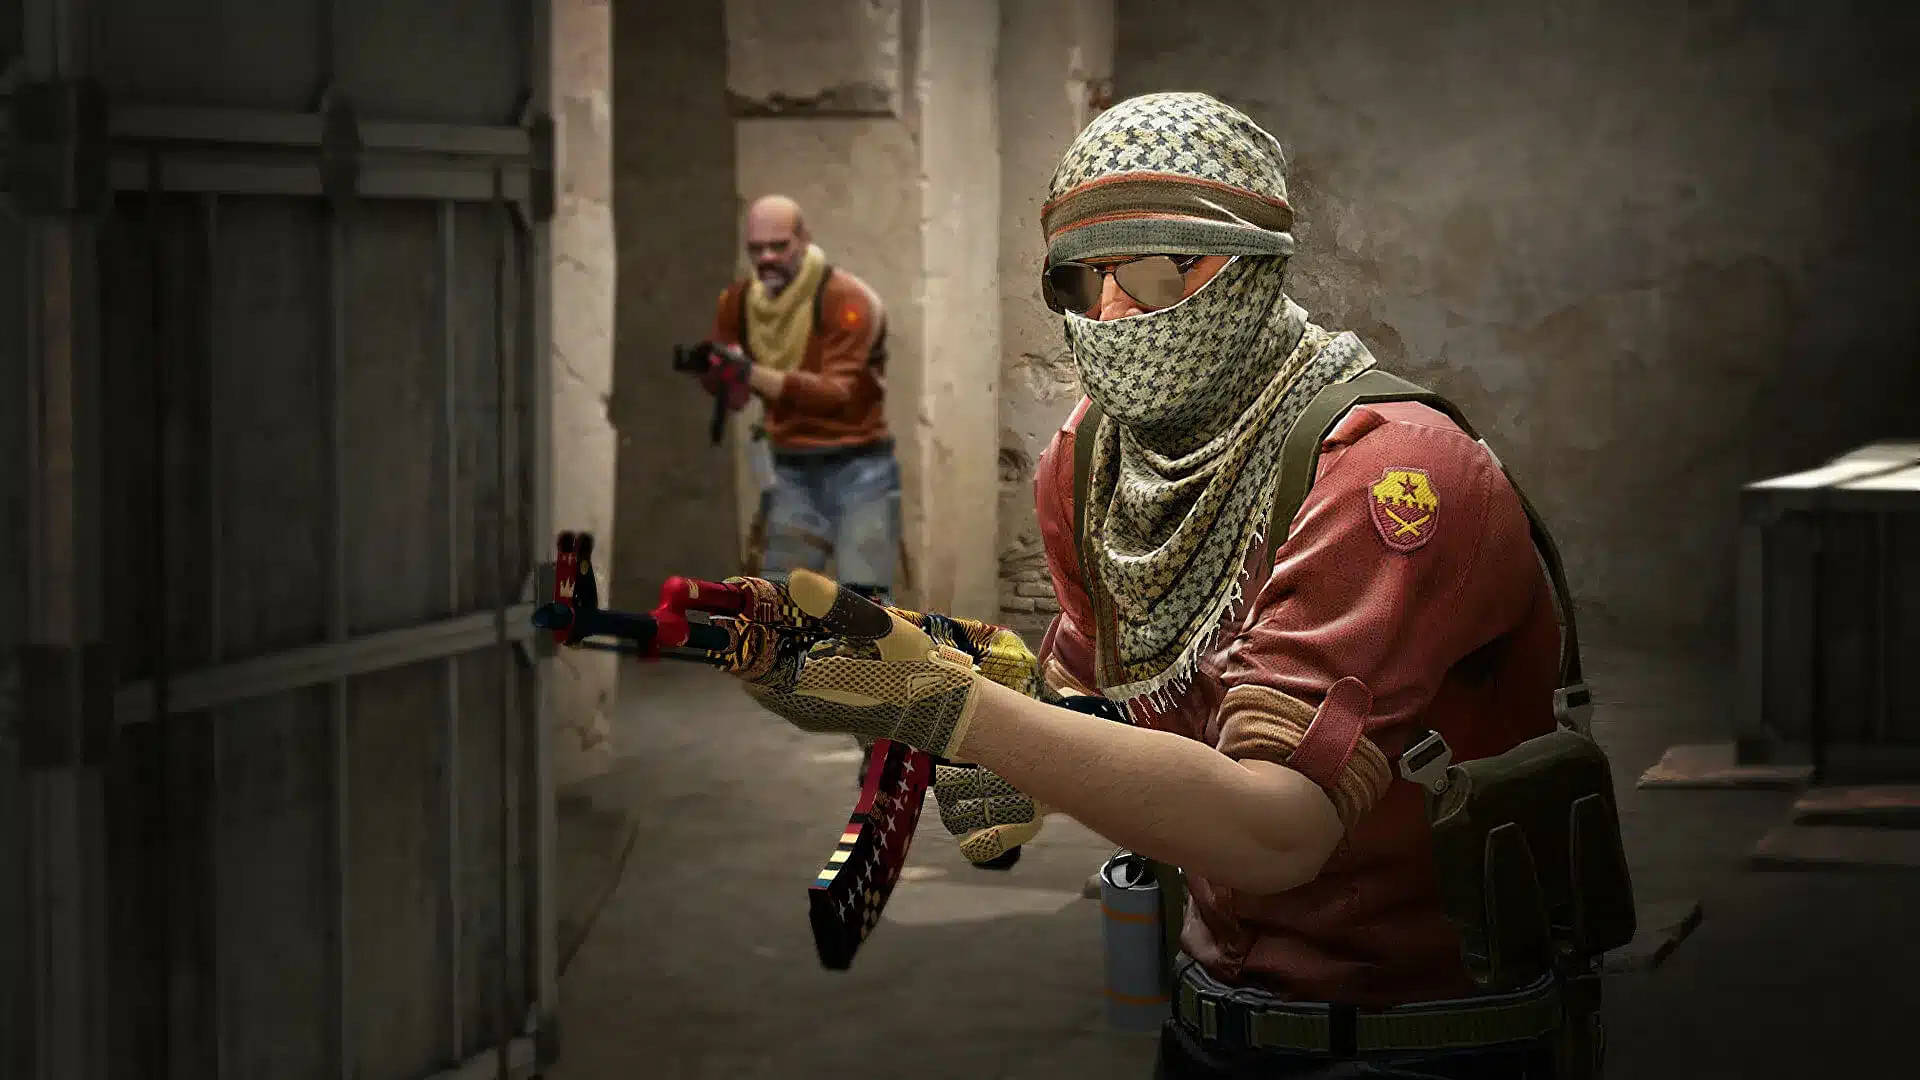 Counter-Strike 2 is being massively review bombed on Steam